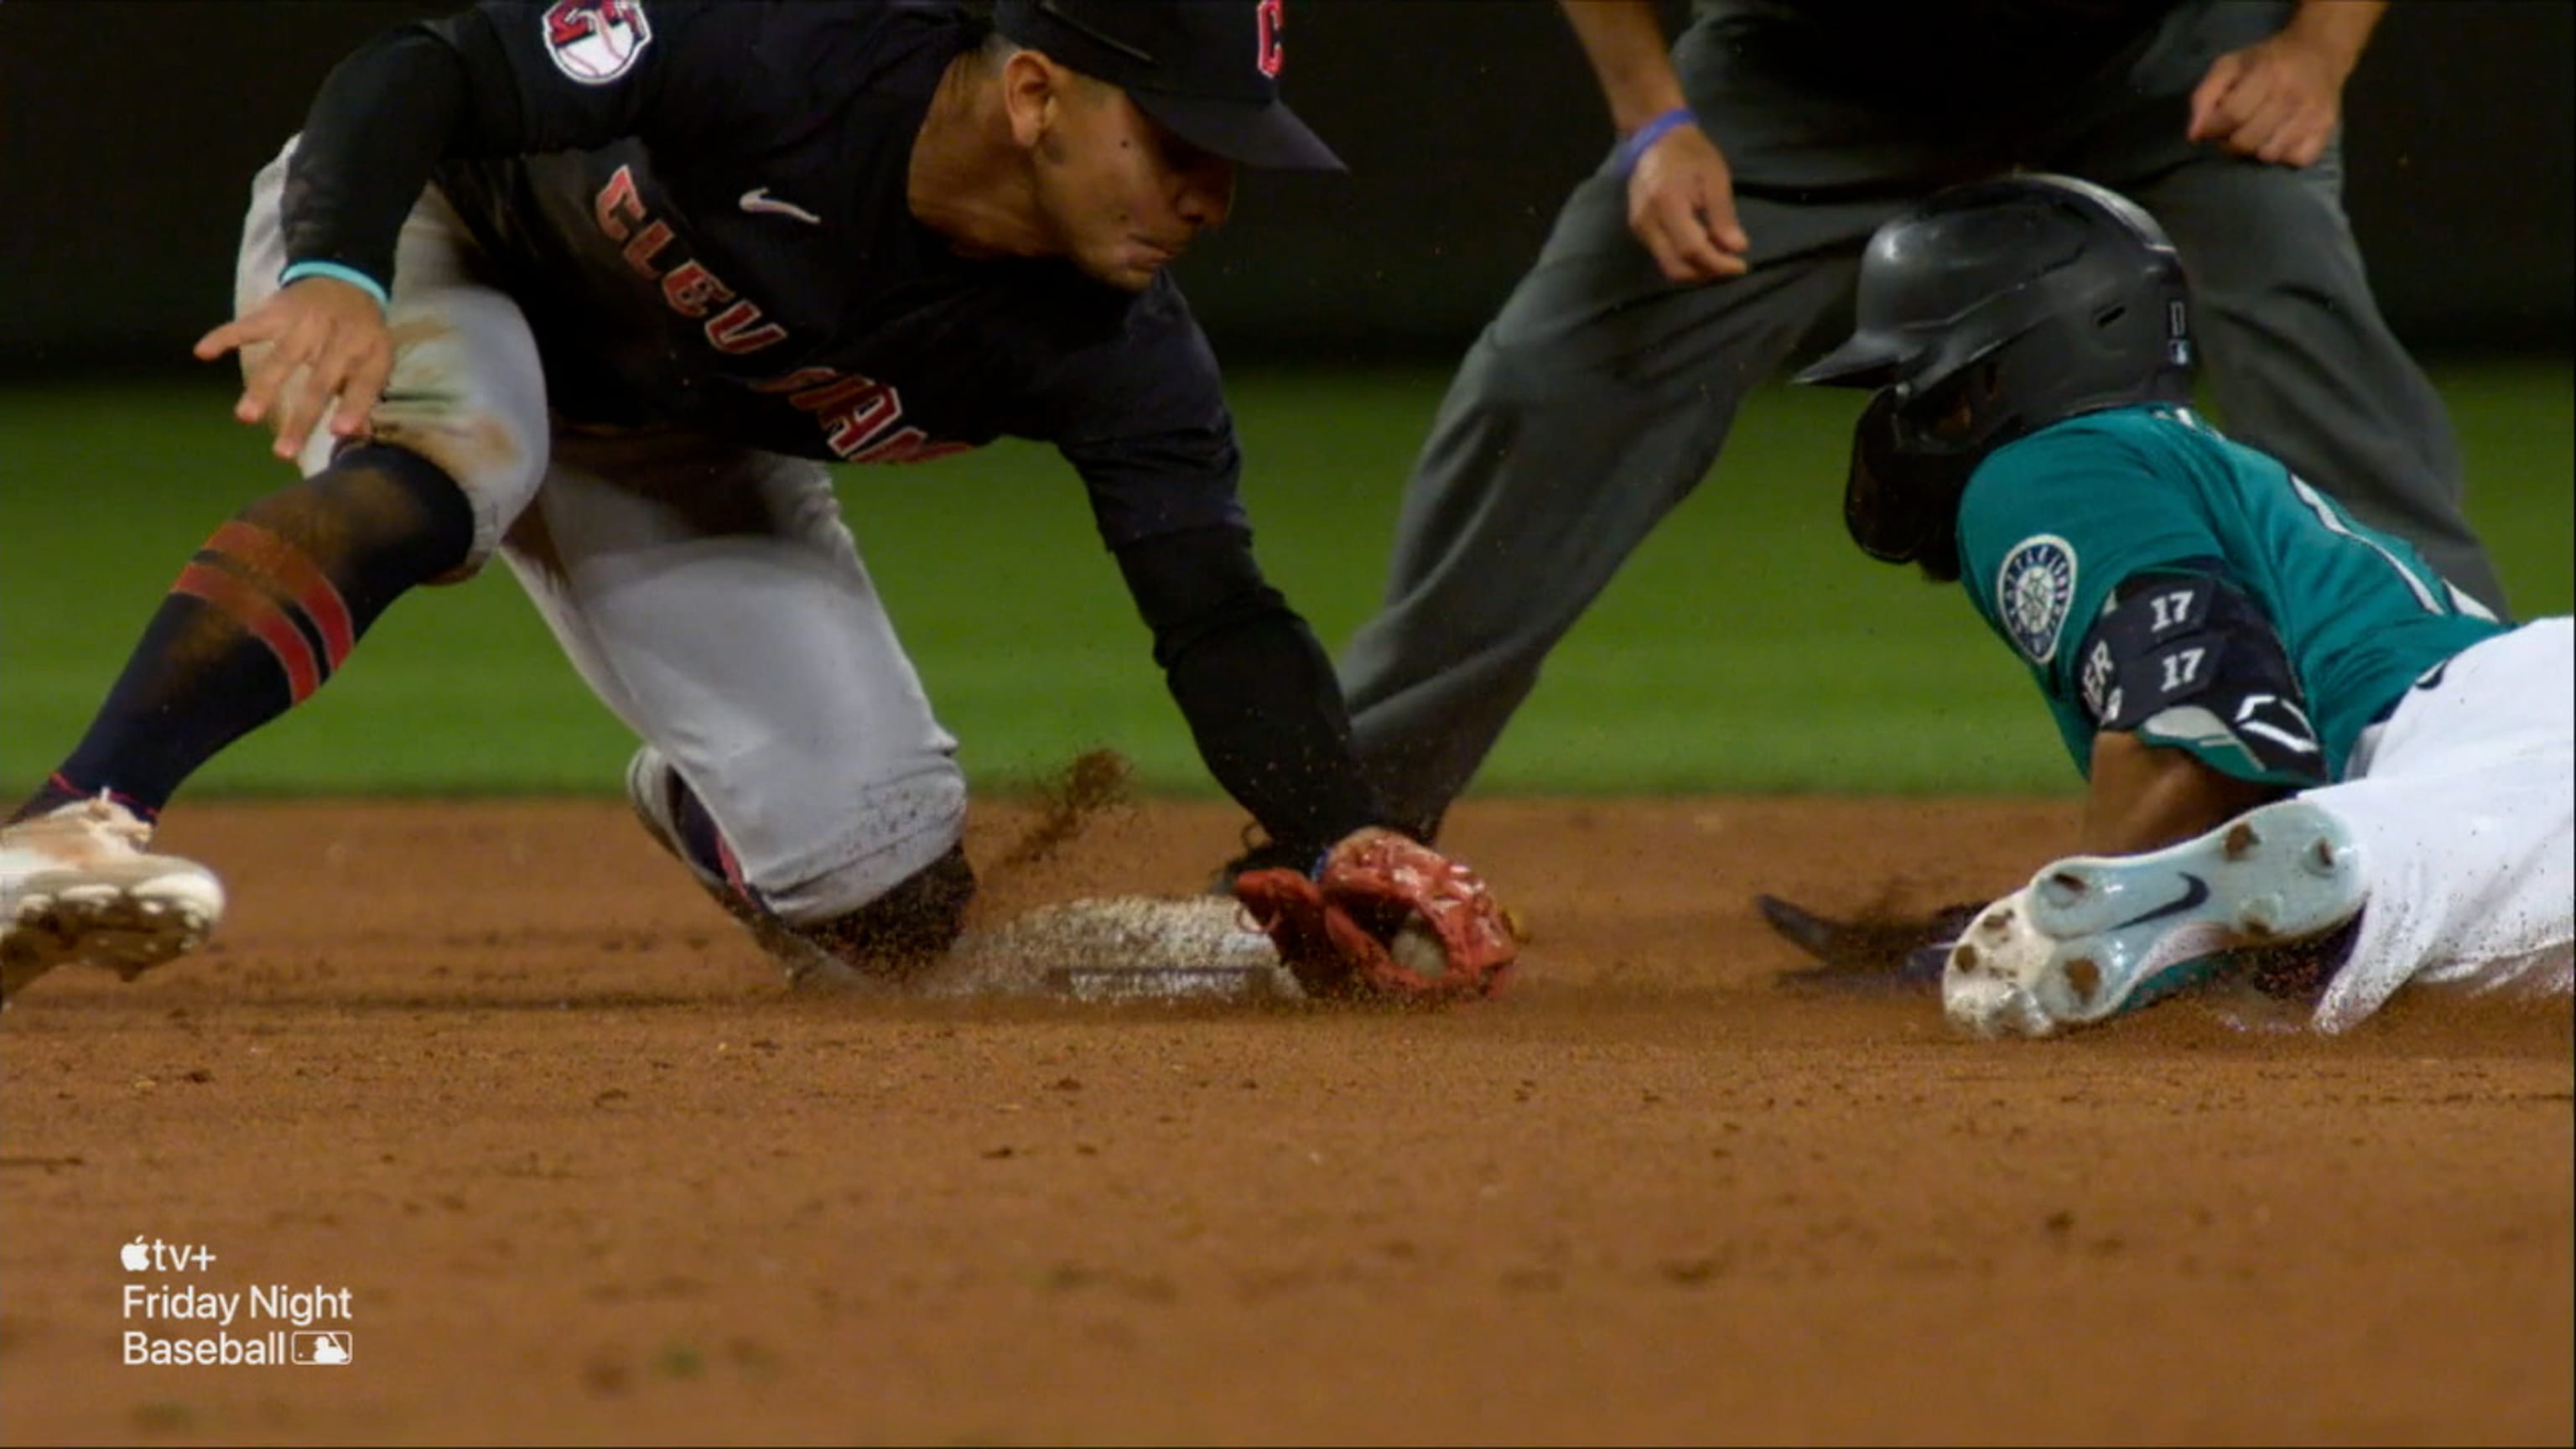 Haniger's nifty slide at second